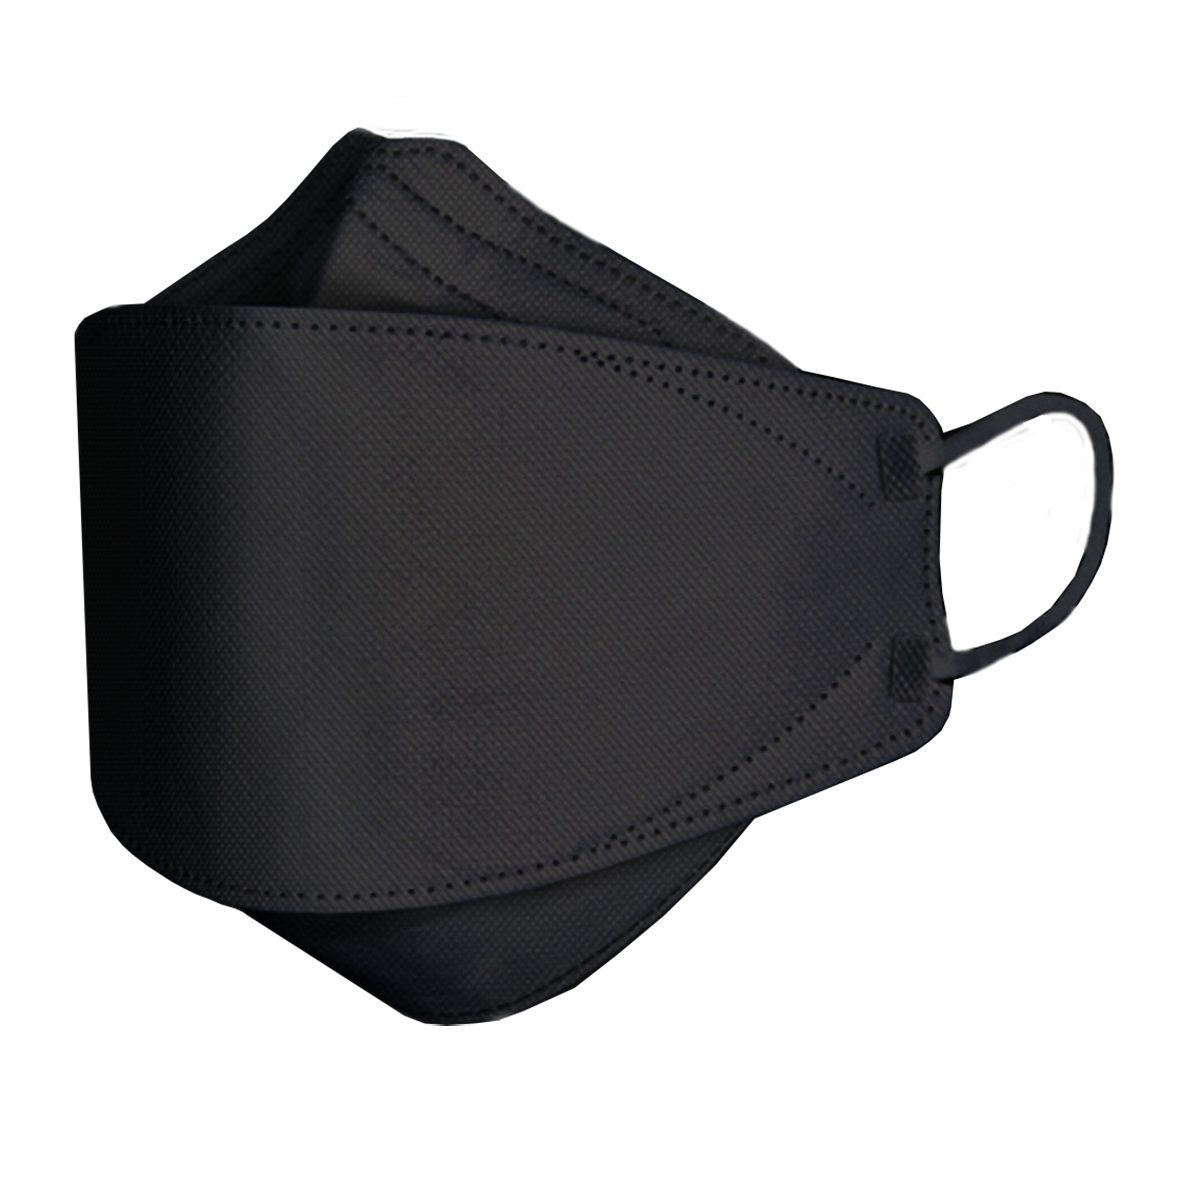 Side view of a 4 layer black mask with adjustable nose piece and 3D Fit